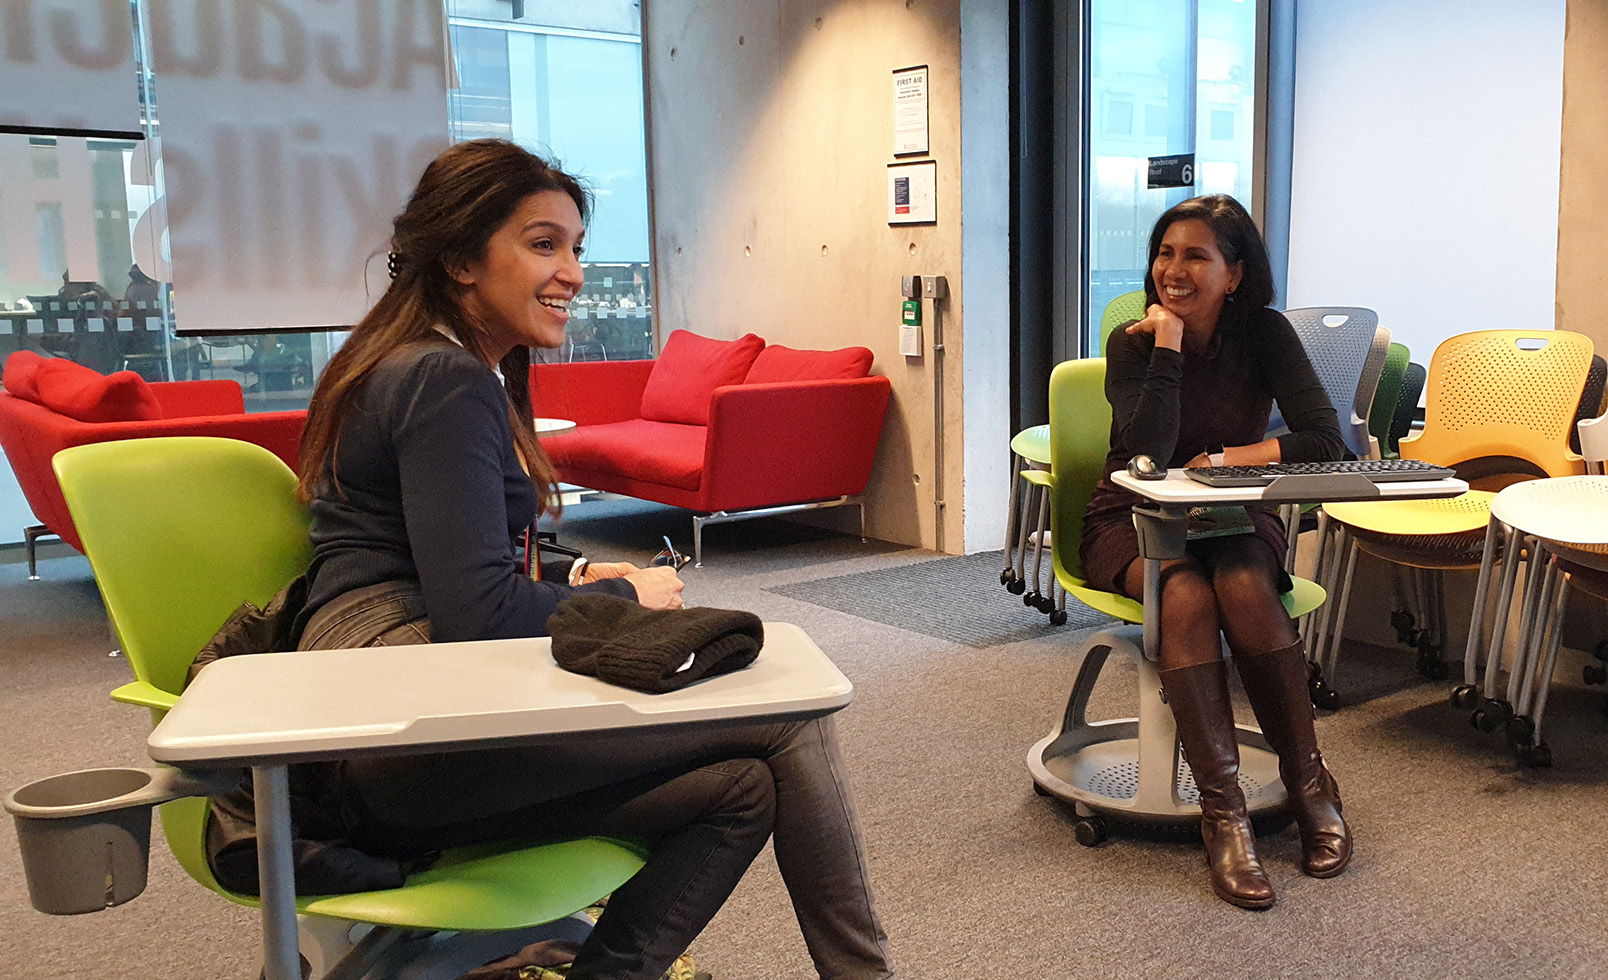 Two friends sit smiling in lecture chairs. They are south-Asian women wearing smart workwear.